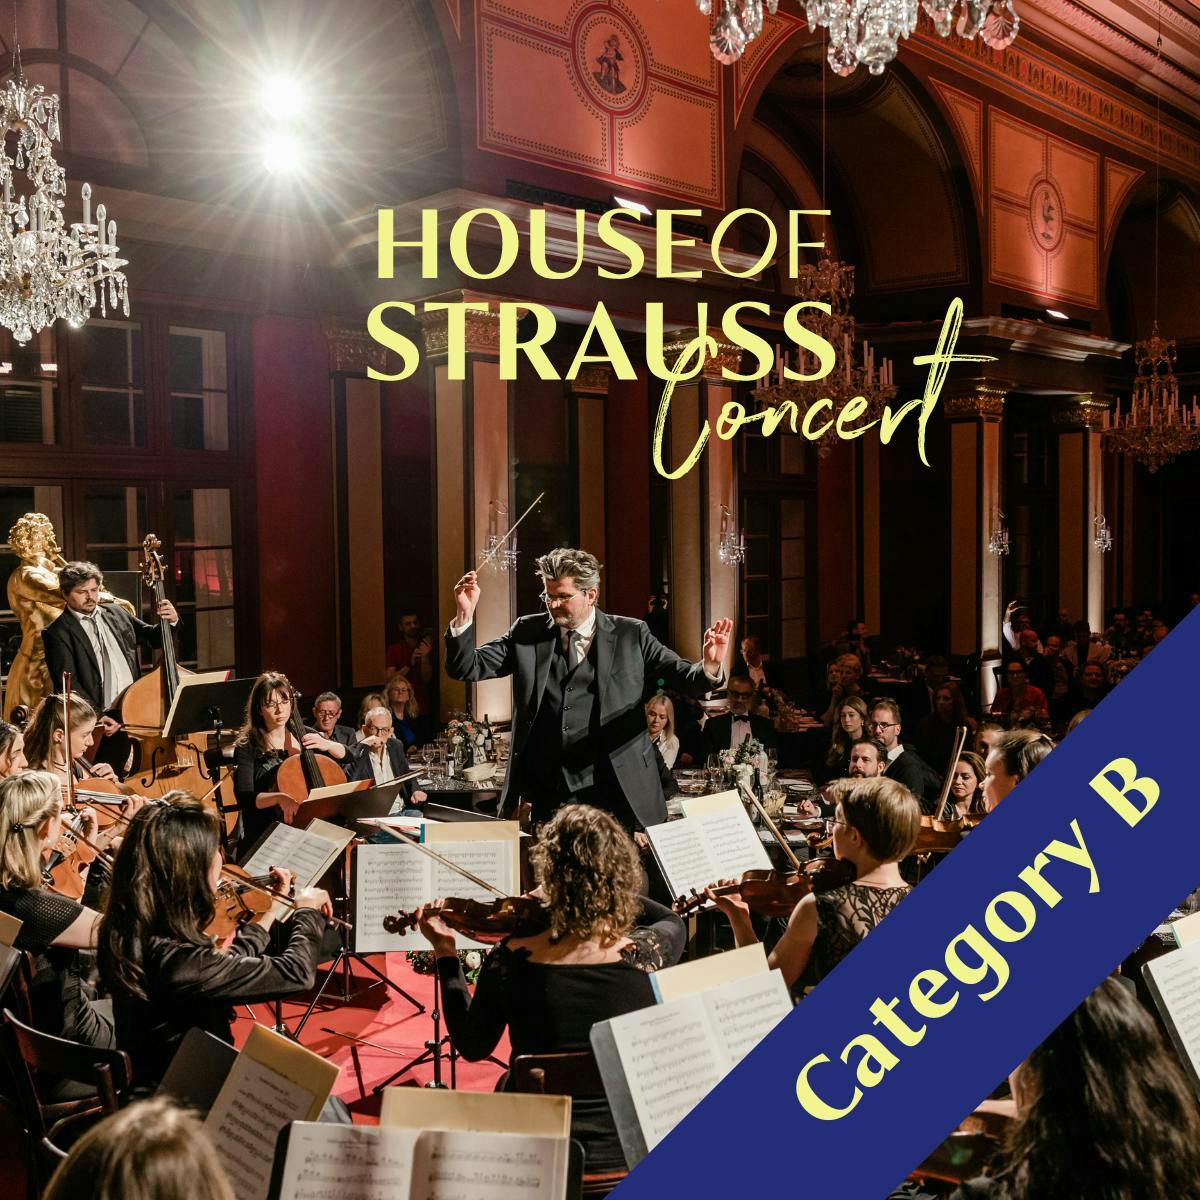 House of Strauss Concert Show Category B Ticket